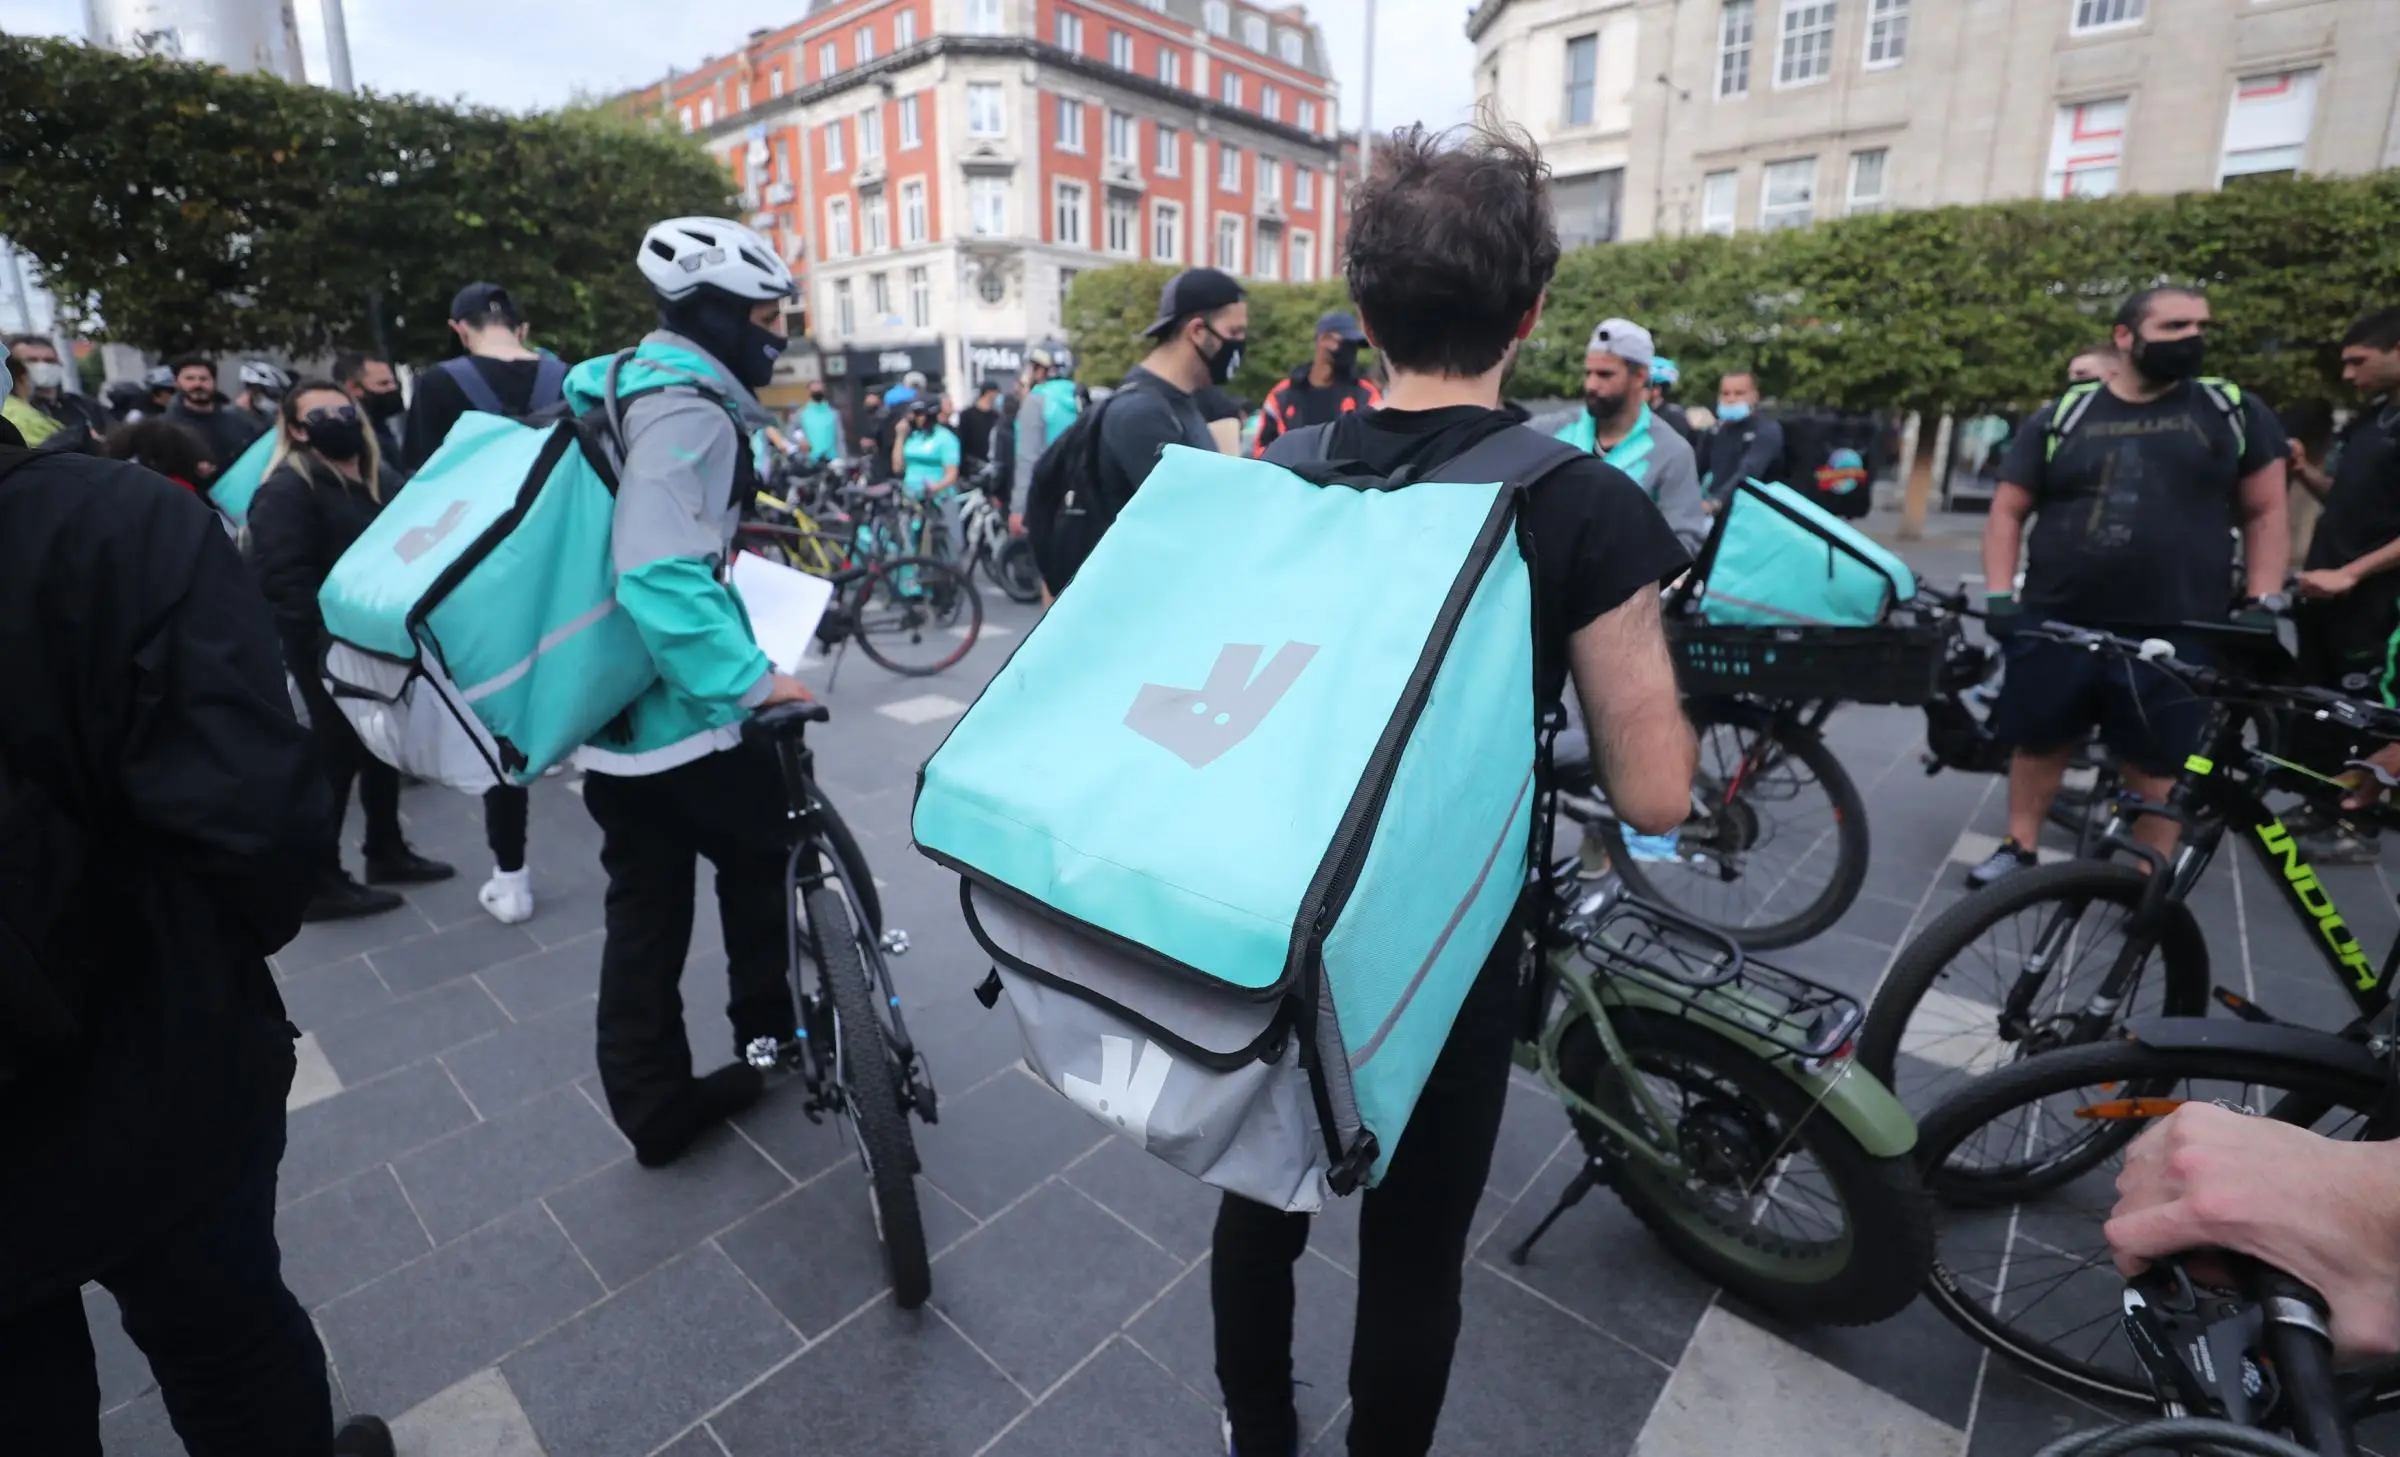 DELIVEROO FILING SHOWS IT POSTED A LOSS OF £223.7M